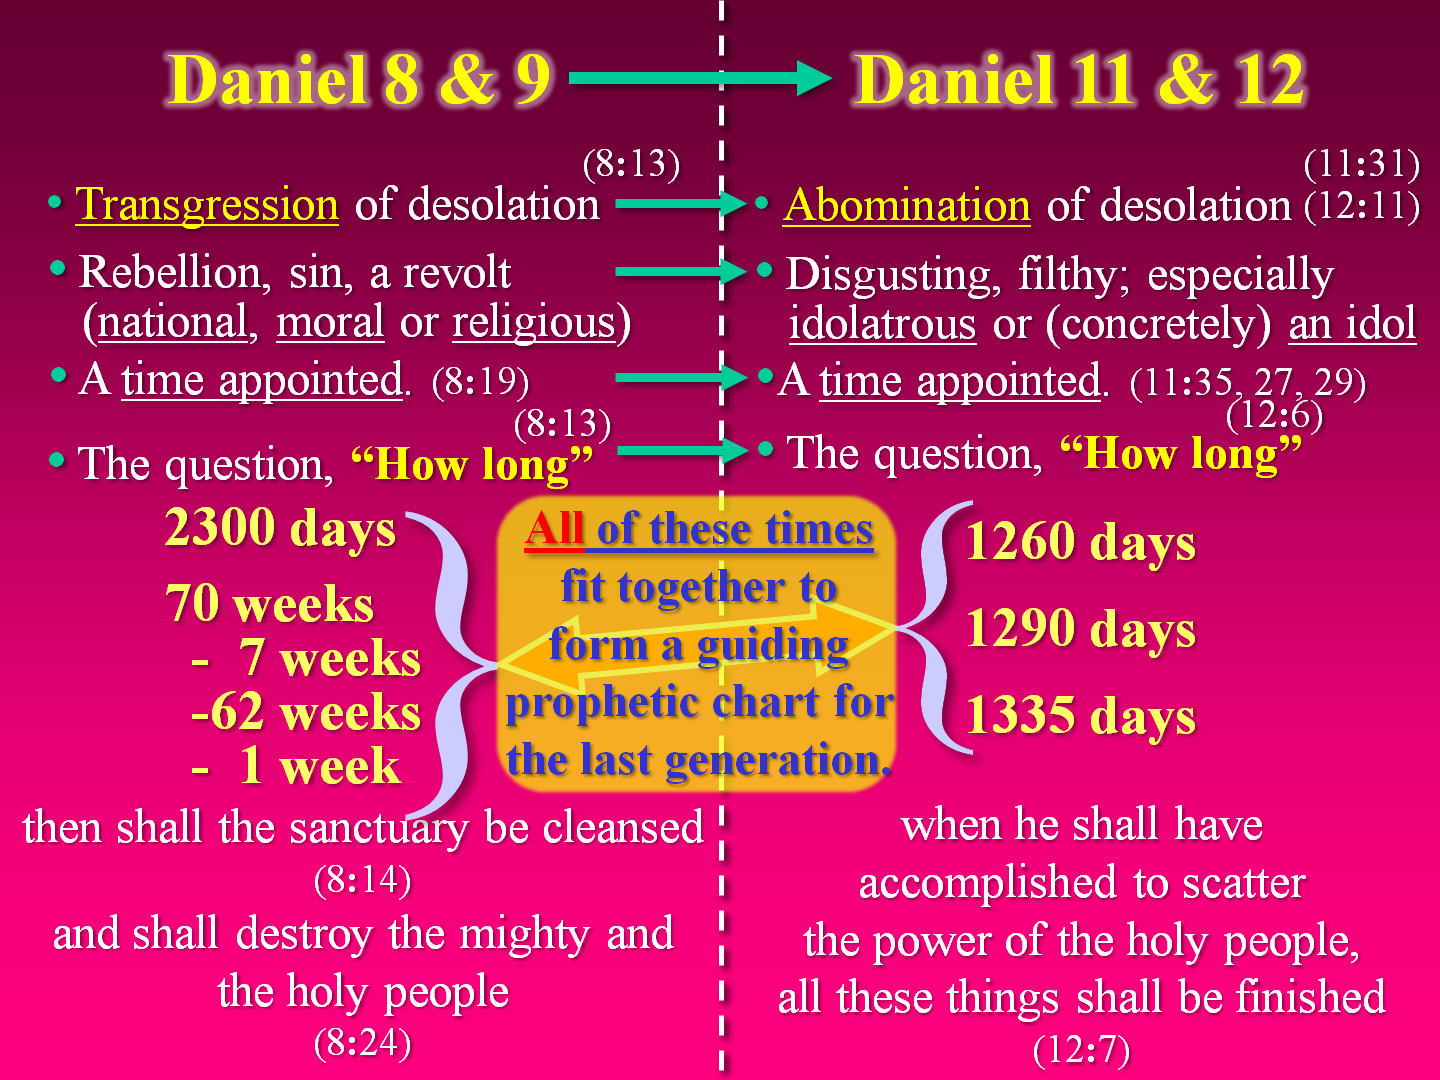 Chart comparing Daniel 8-9 with 11-12